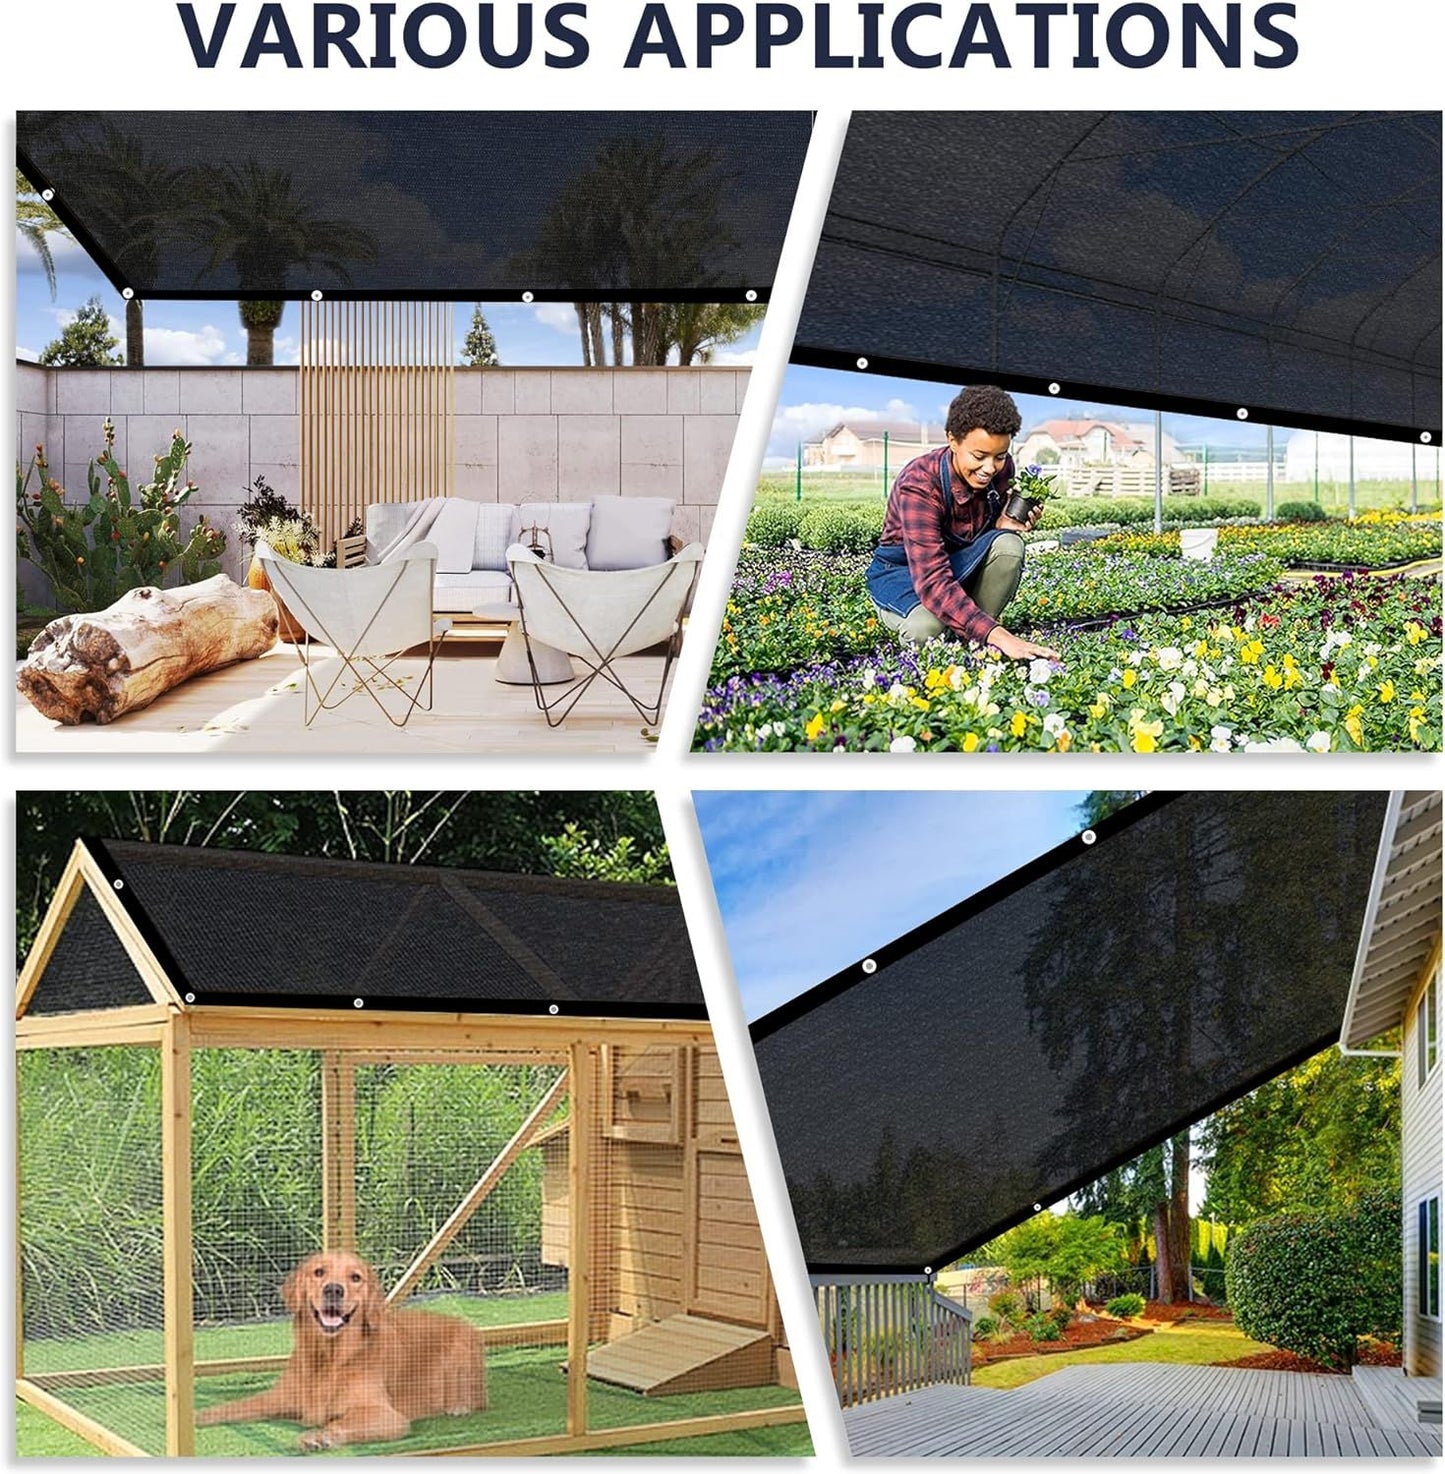 Vicllax 70% Heavy Duty Shade Fabric Cover Canopy Cloth 8x12 Ft-For Plants-Patio